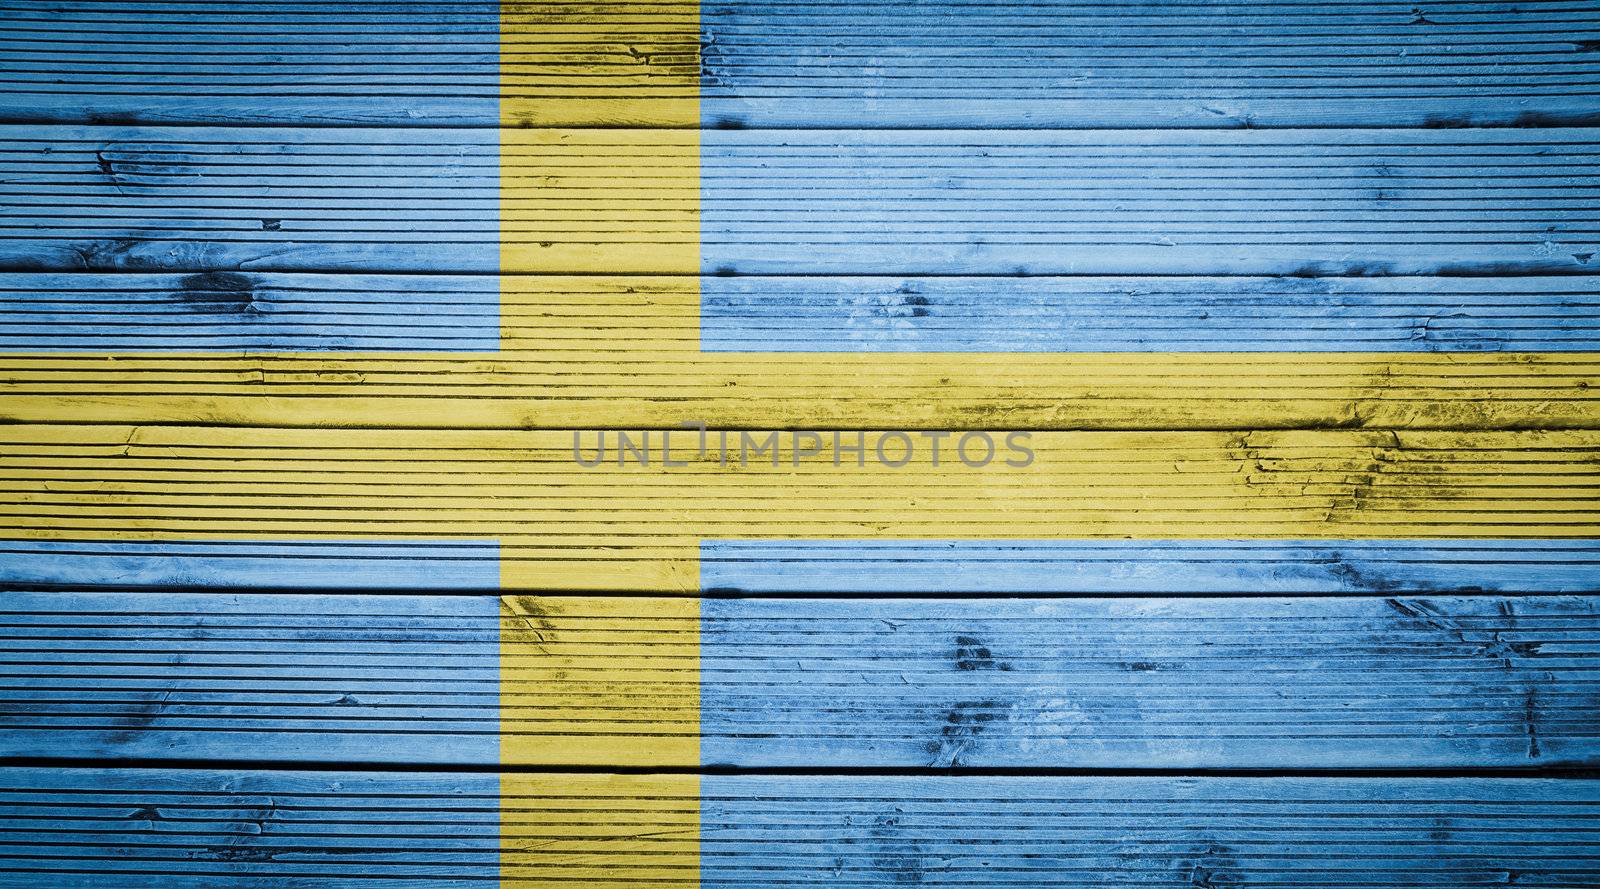 Wood texture background with colors of the flag of Sweden by doble.d